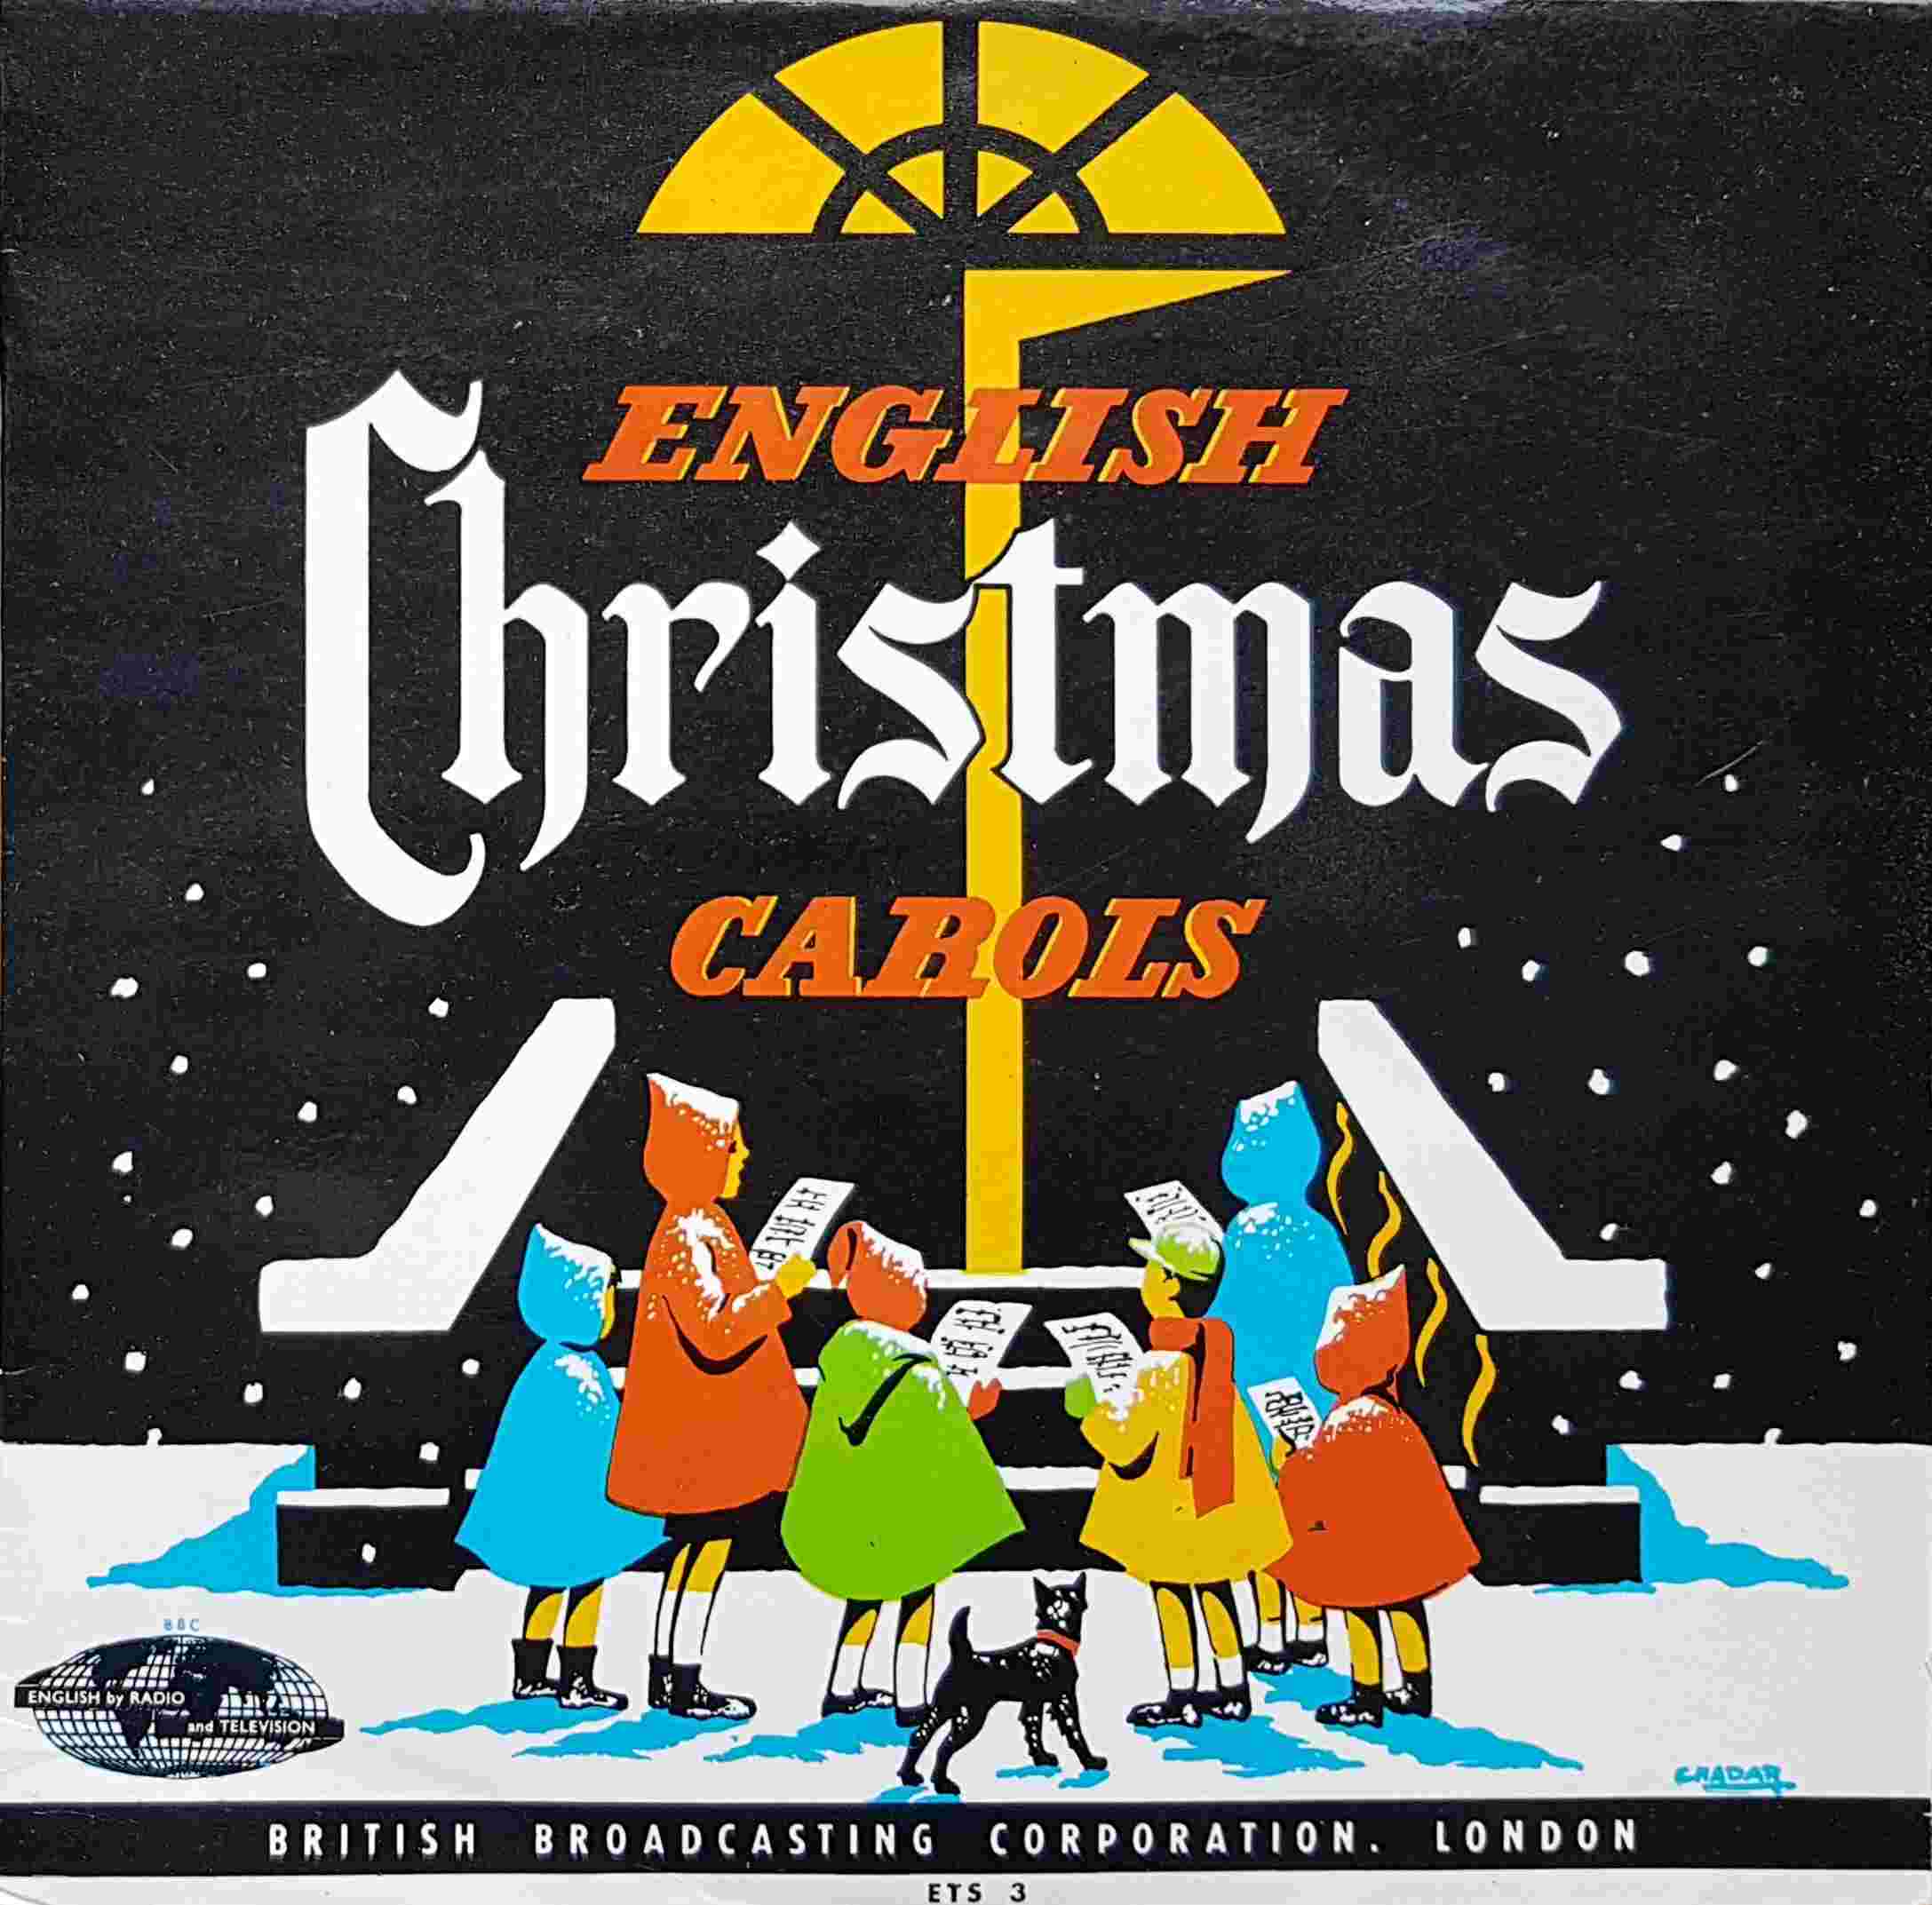 Picture of ETS 3 Christmas carols by artist Choir of King's College, Cambridge from the BBC 10inches - Records and Tapes library